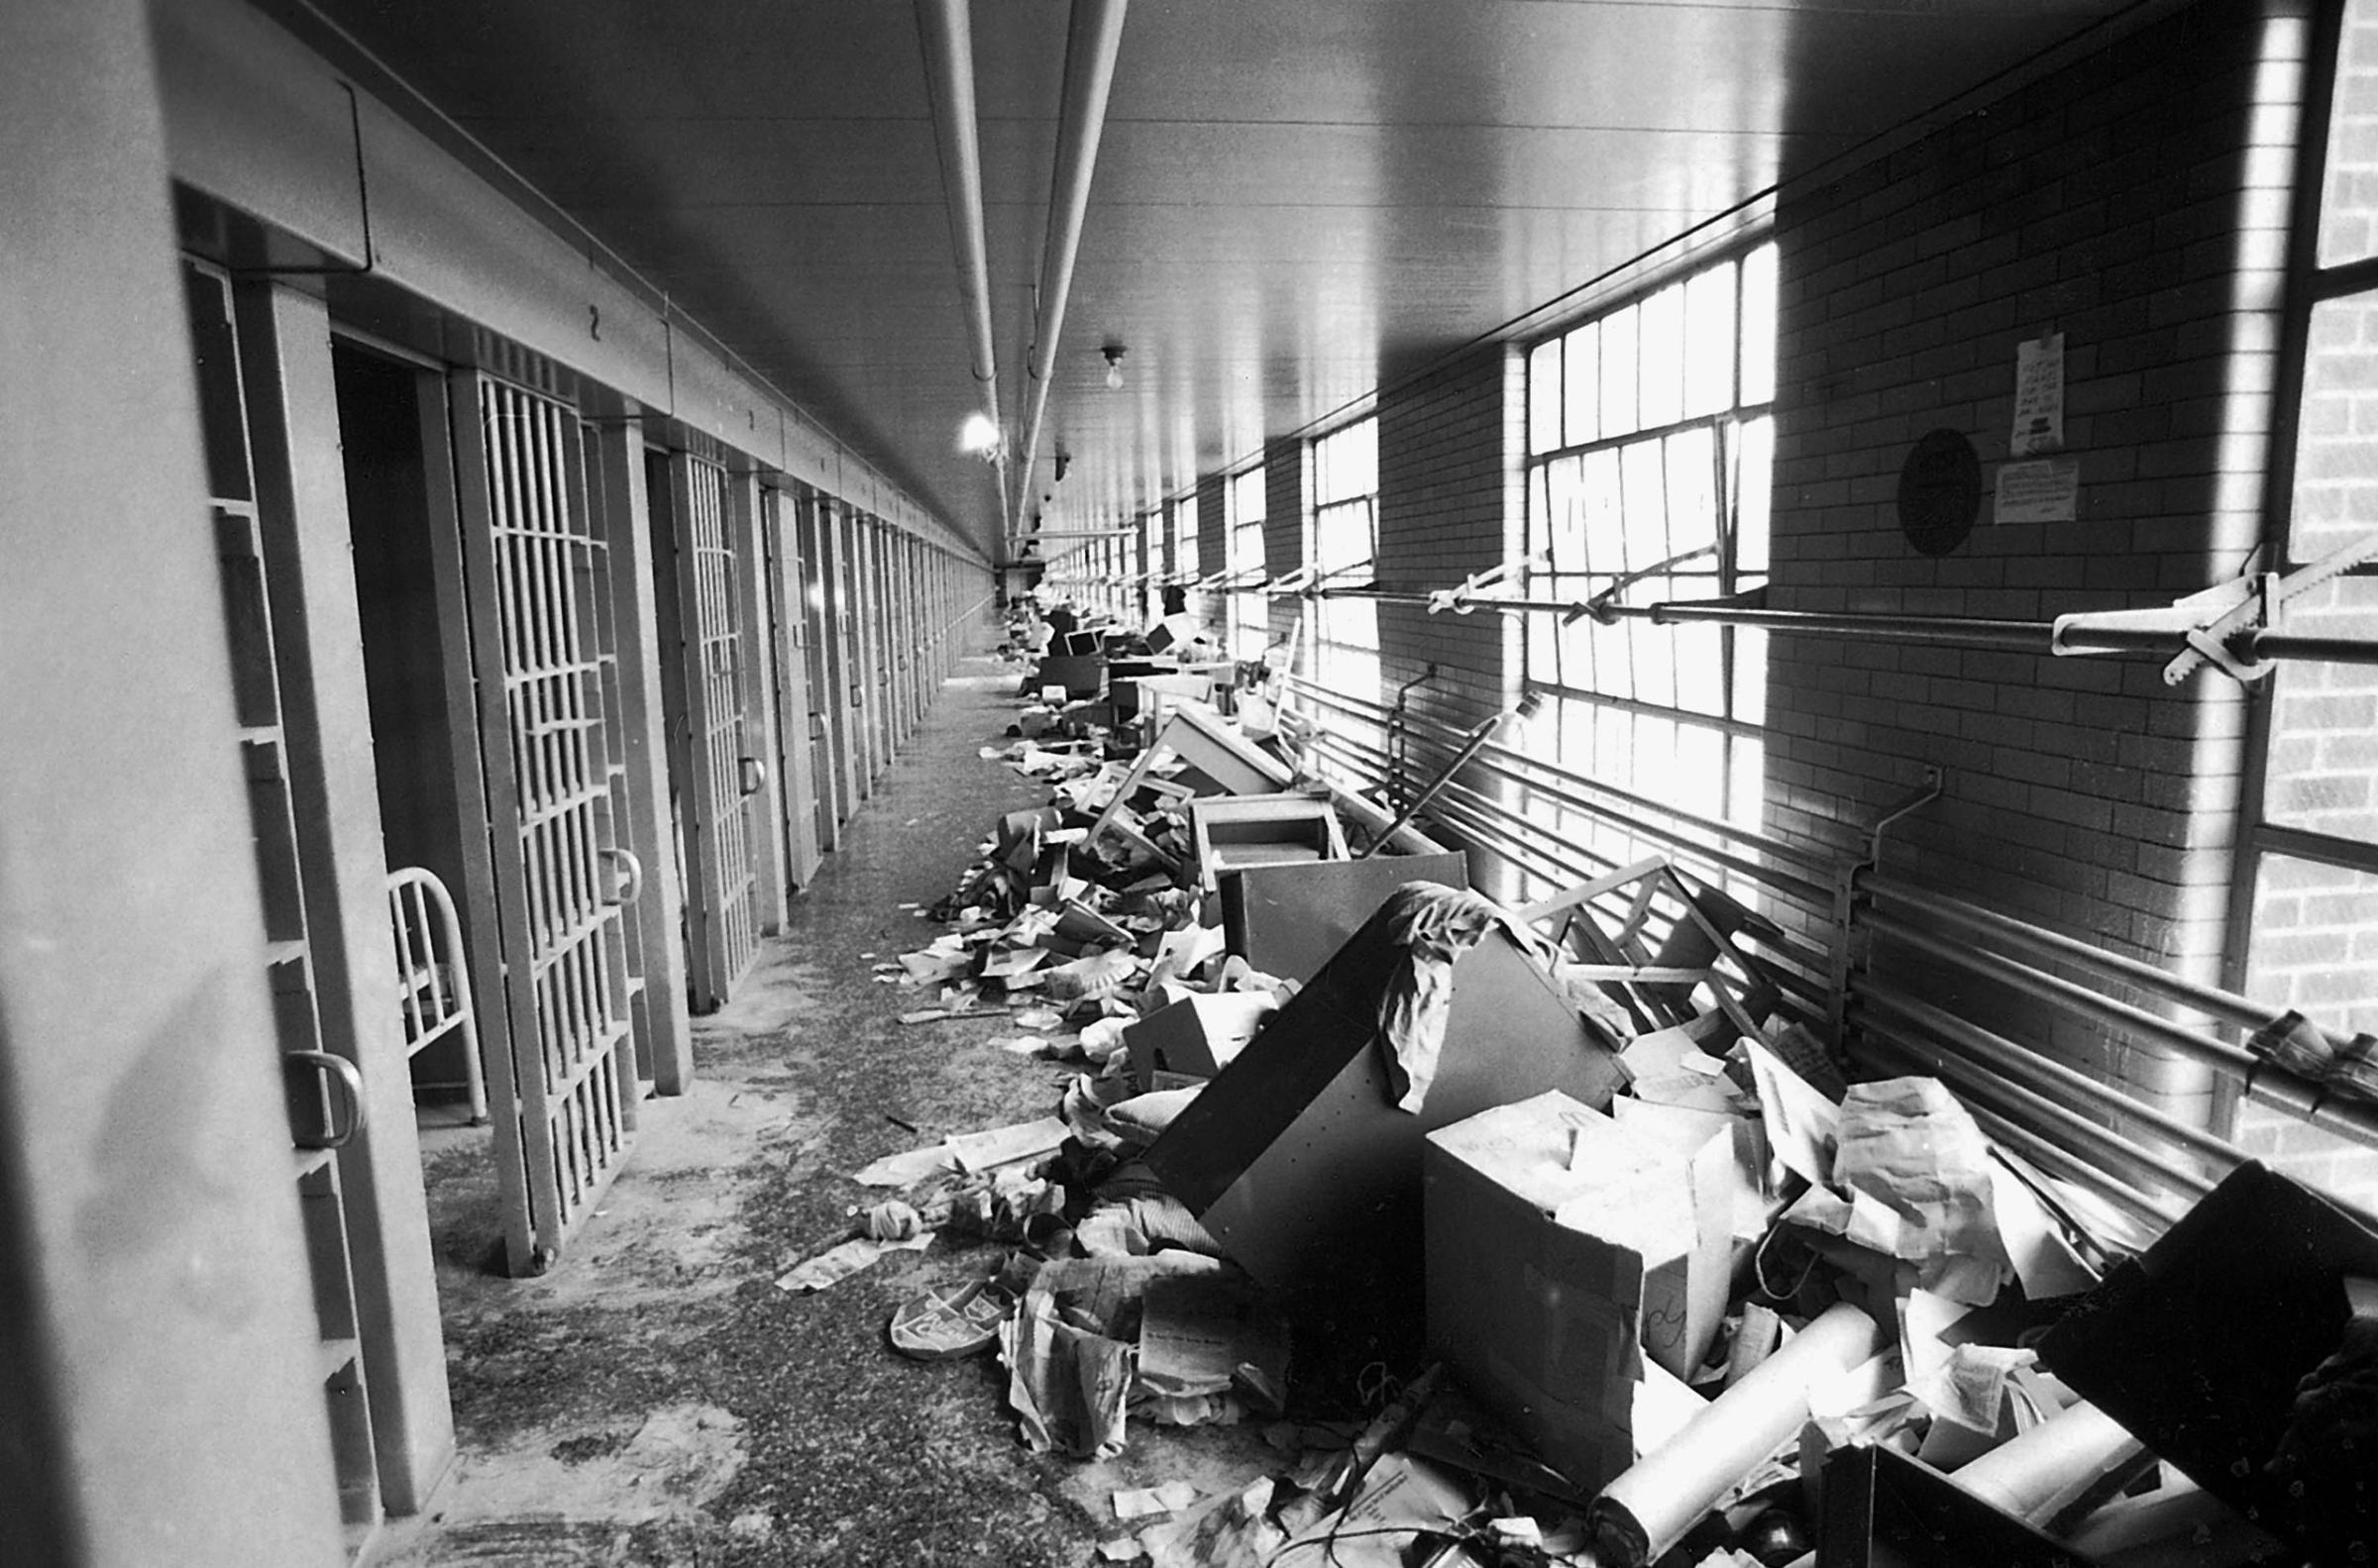 Scenes from the aftermath of the Attica Prison Riot, 1971